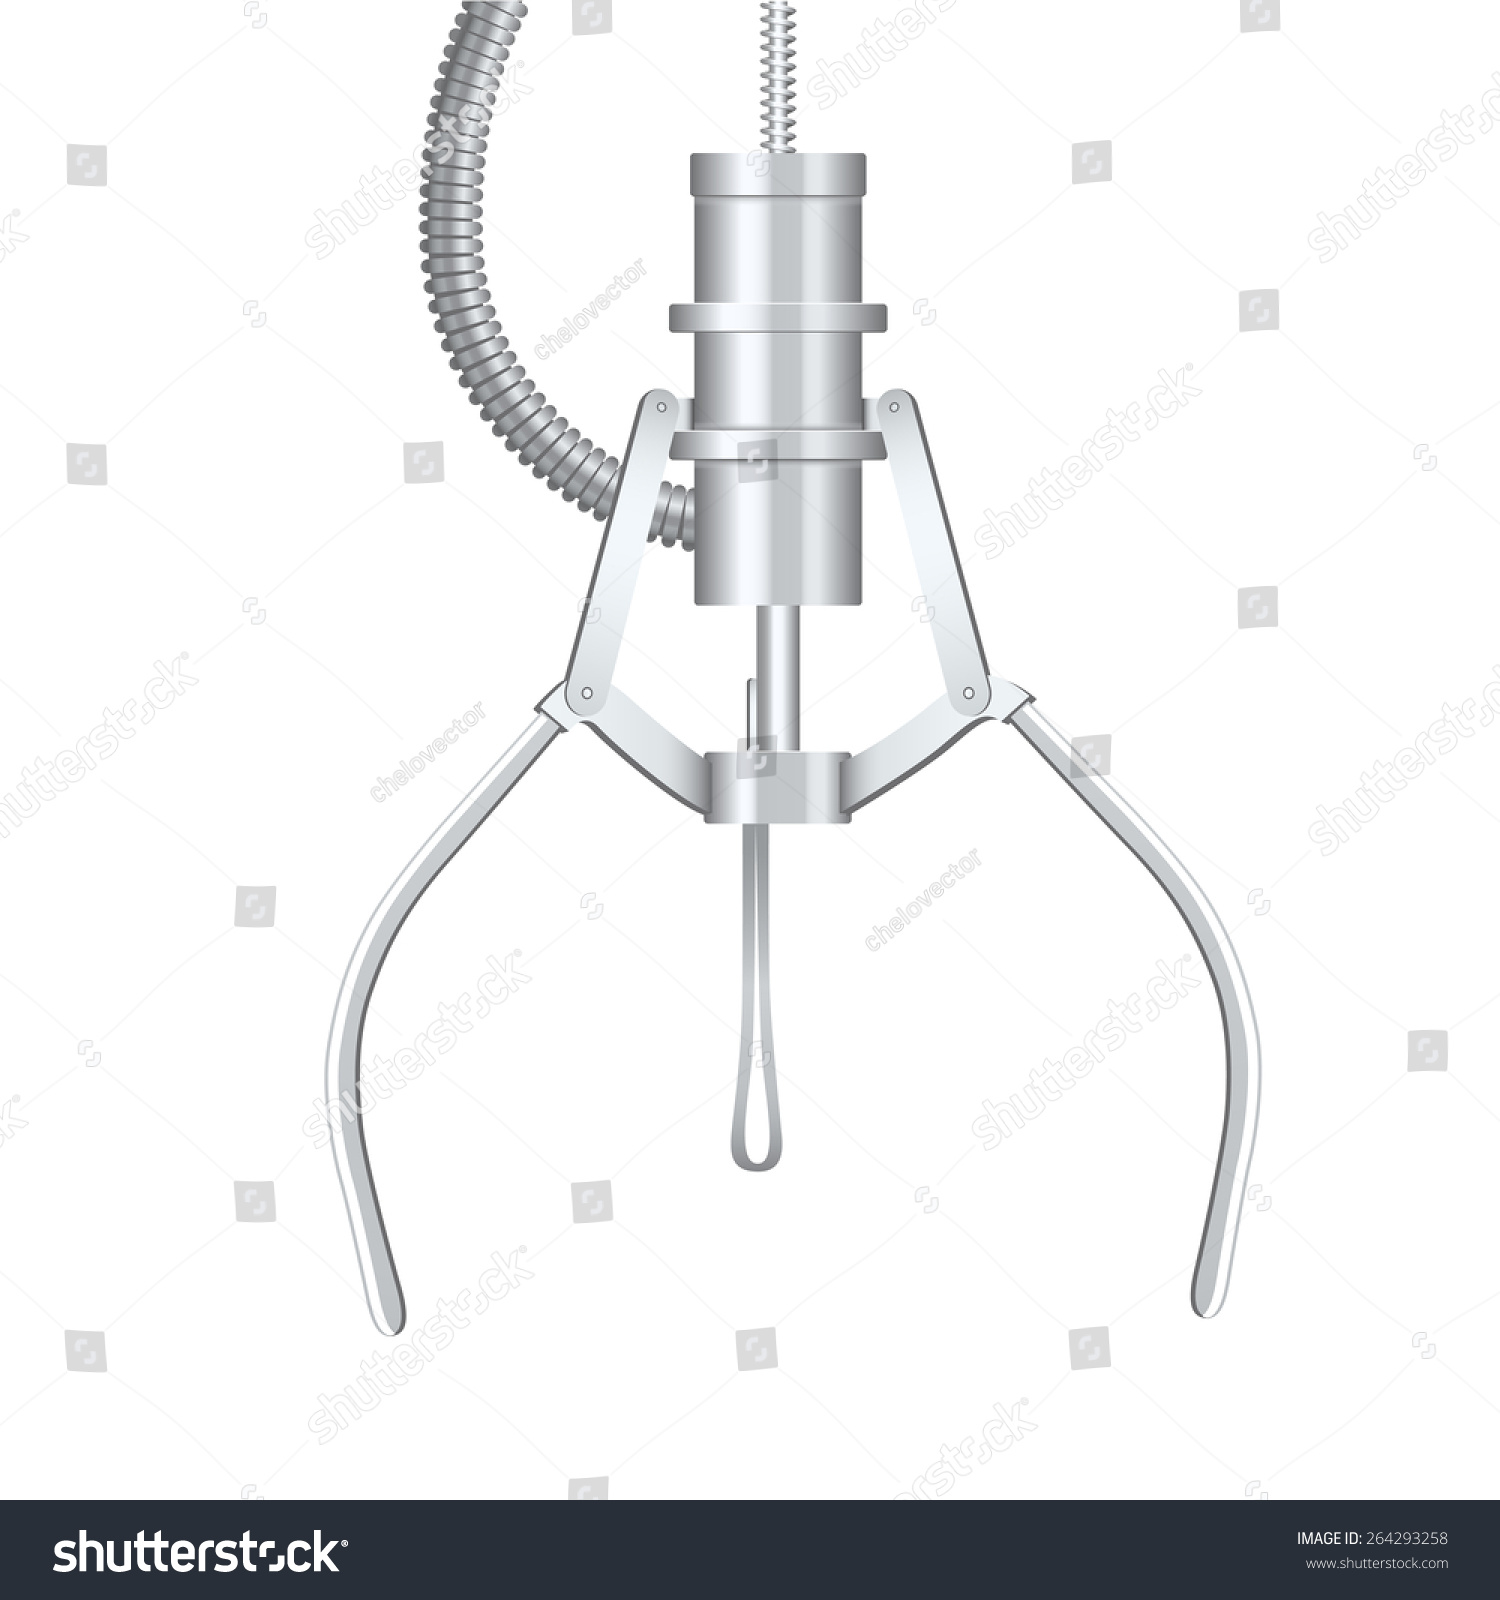 Vector Illustration Claw Game Device Stock Vector 264293258 - Shutterstock